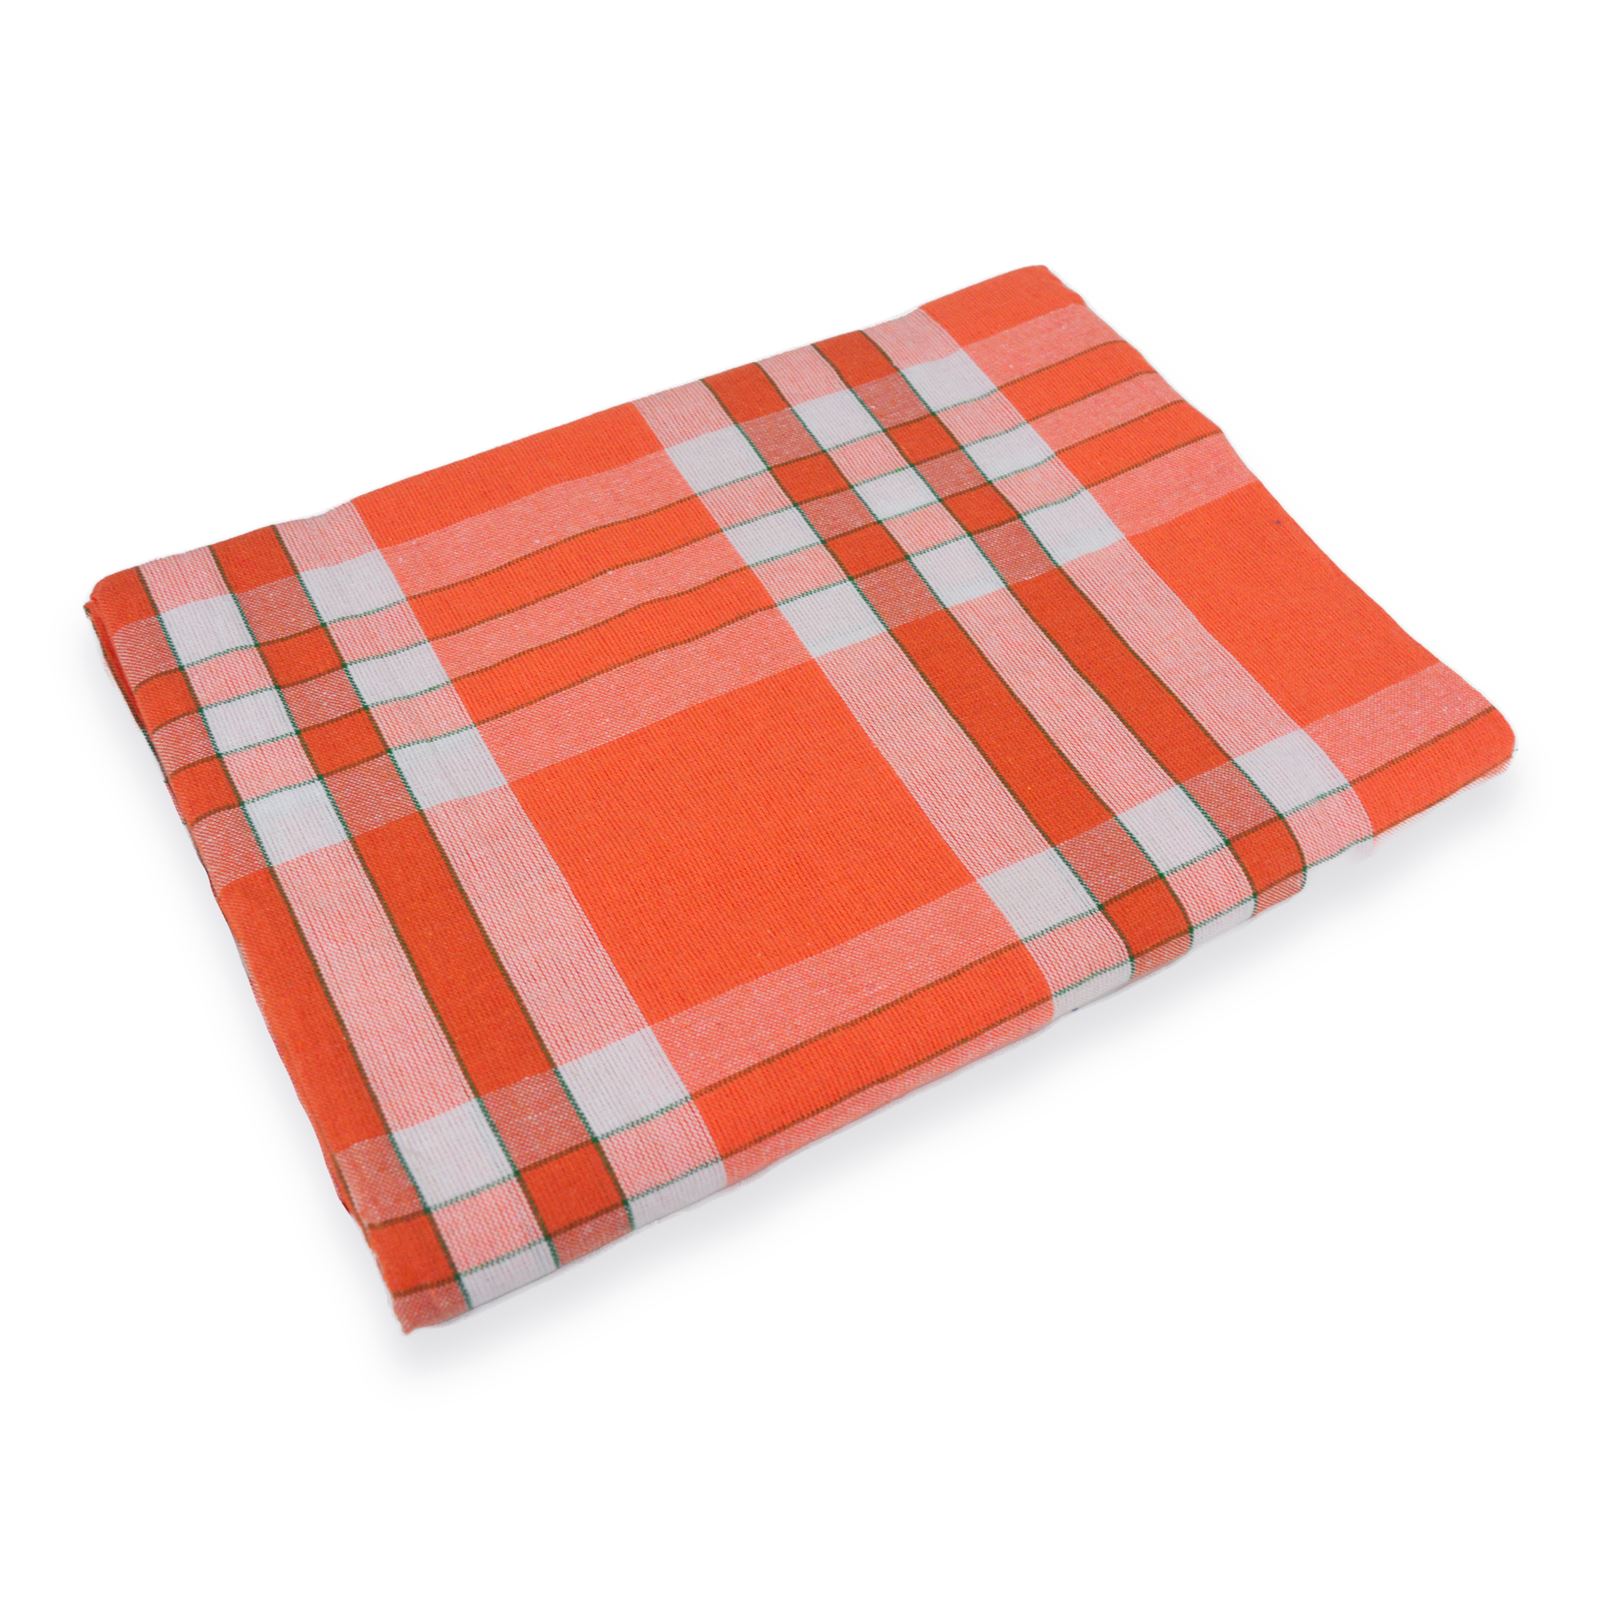 Orange Handloom Cotton Bed Sheets 54x80 (Inches) Checkered Style for Double, Single Beds